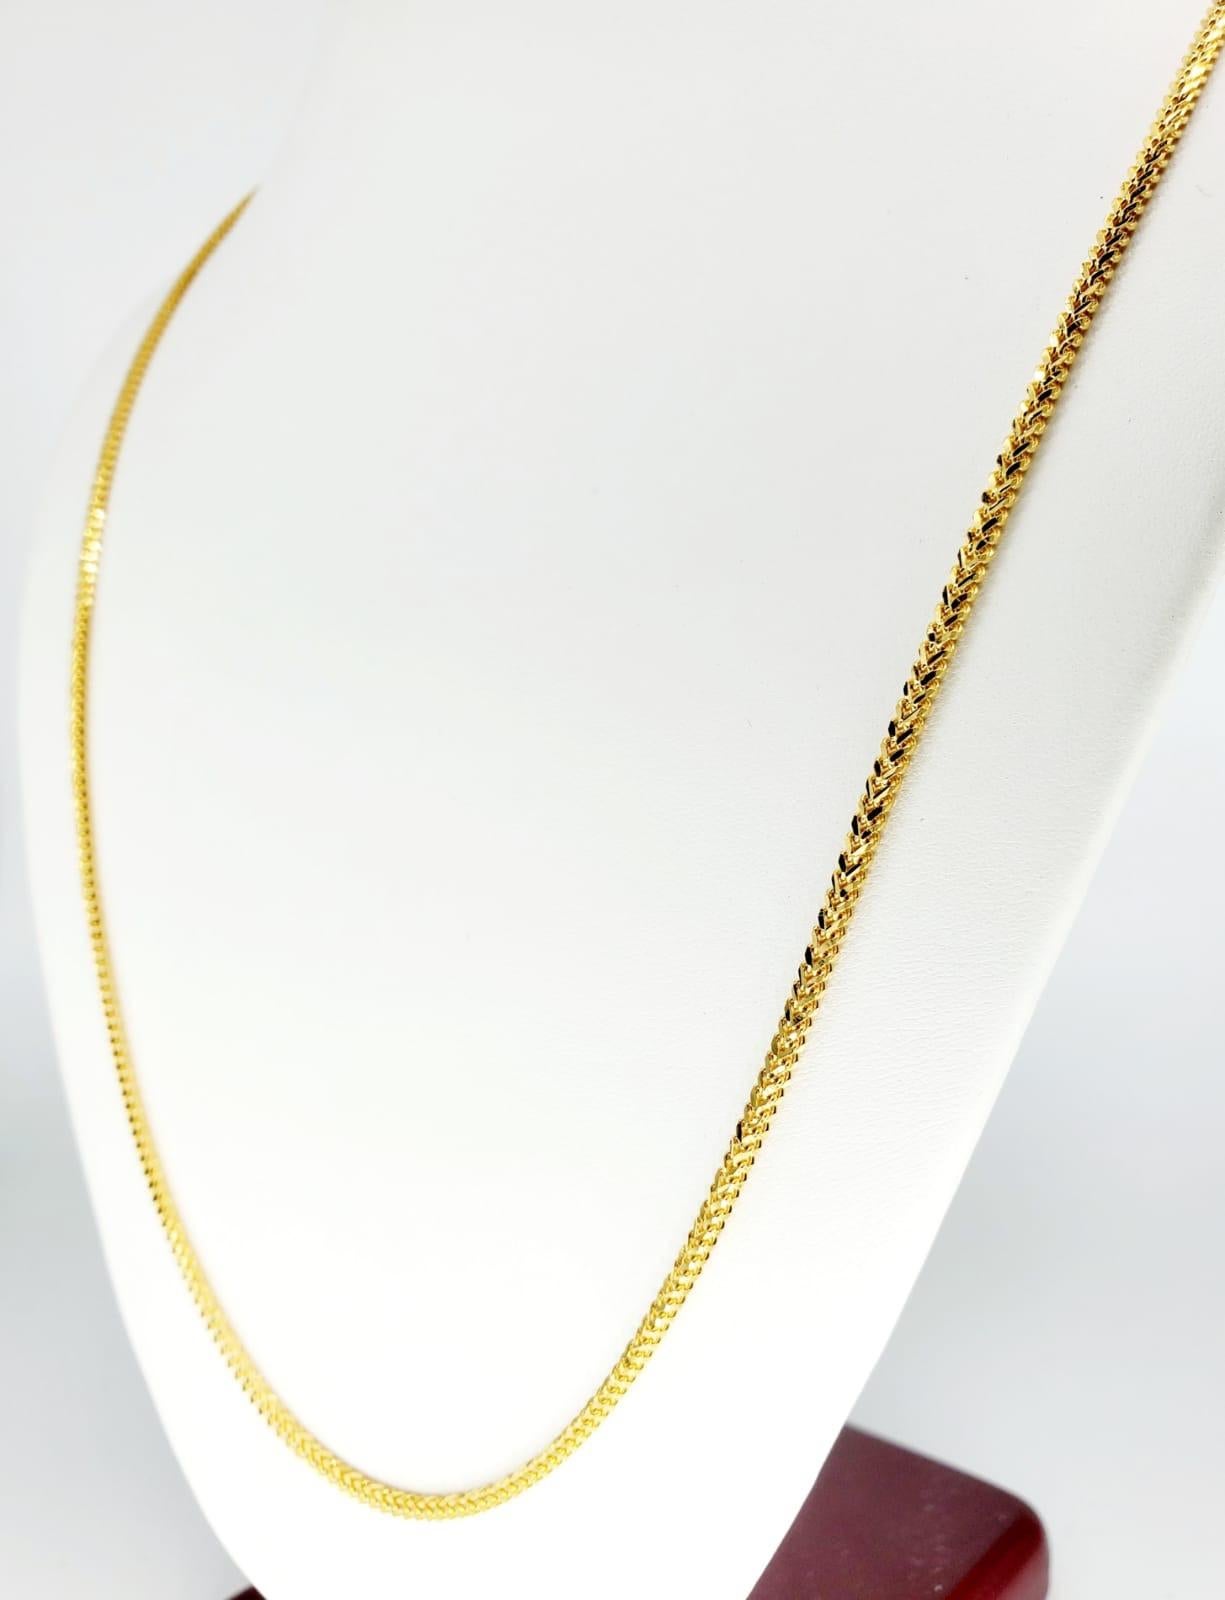 vintage solid 22k yellow gold wheat chain necklace 18.5 inches